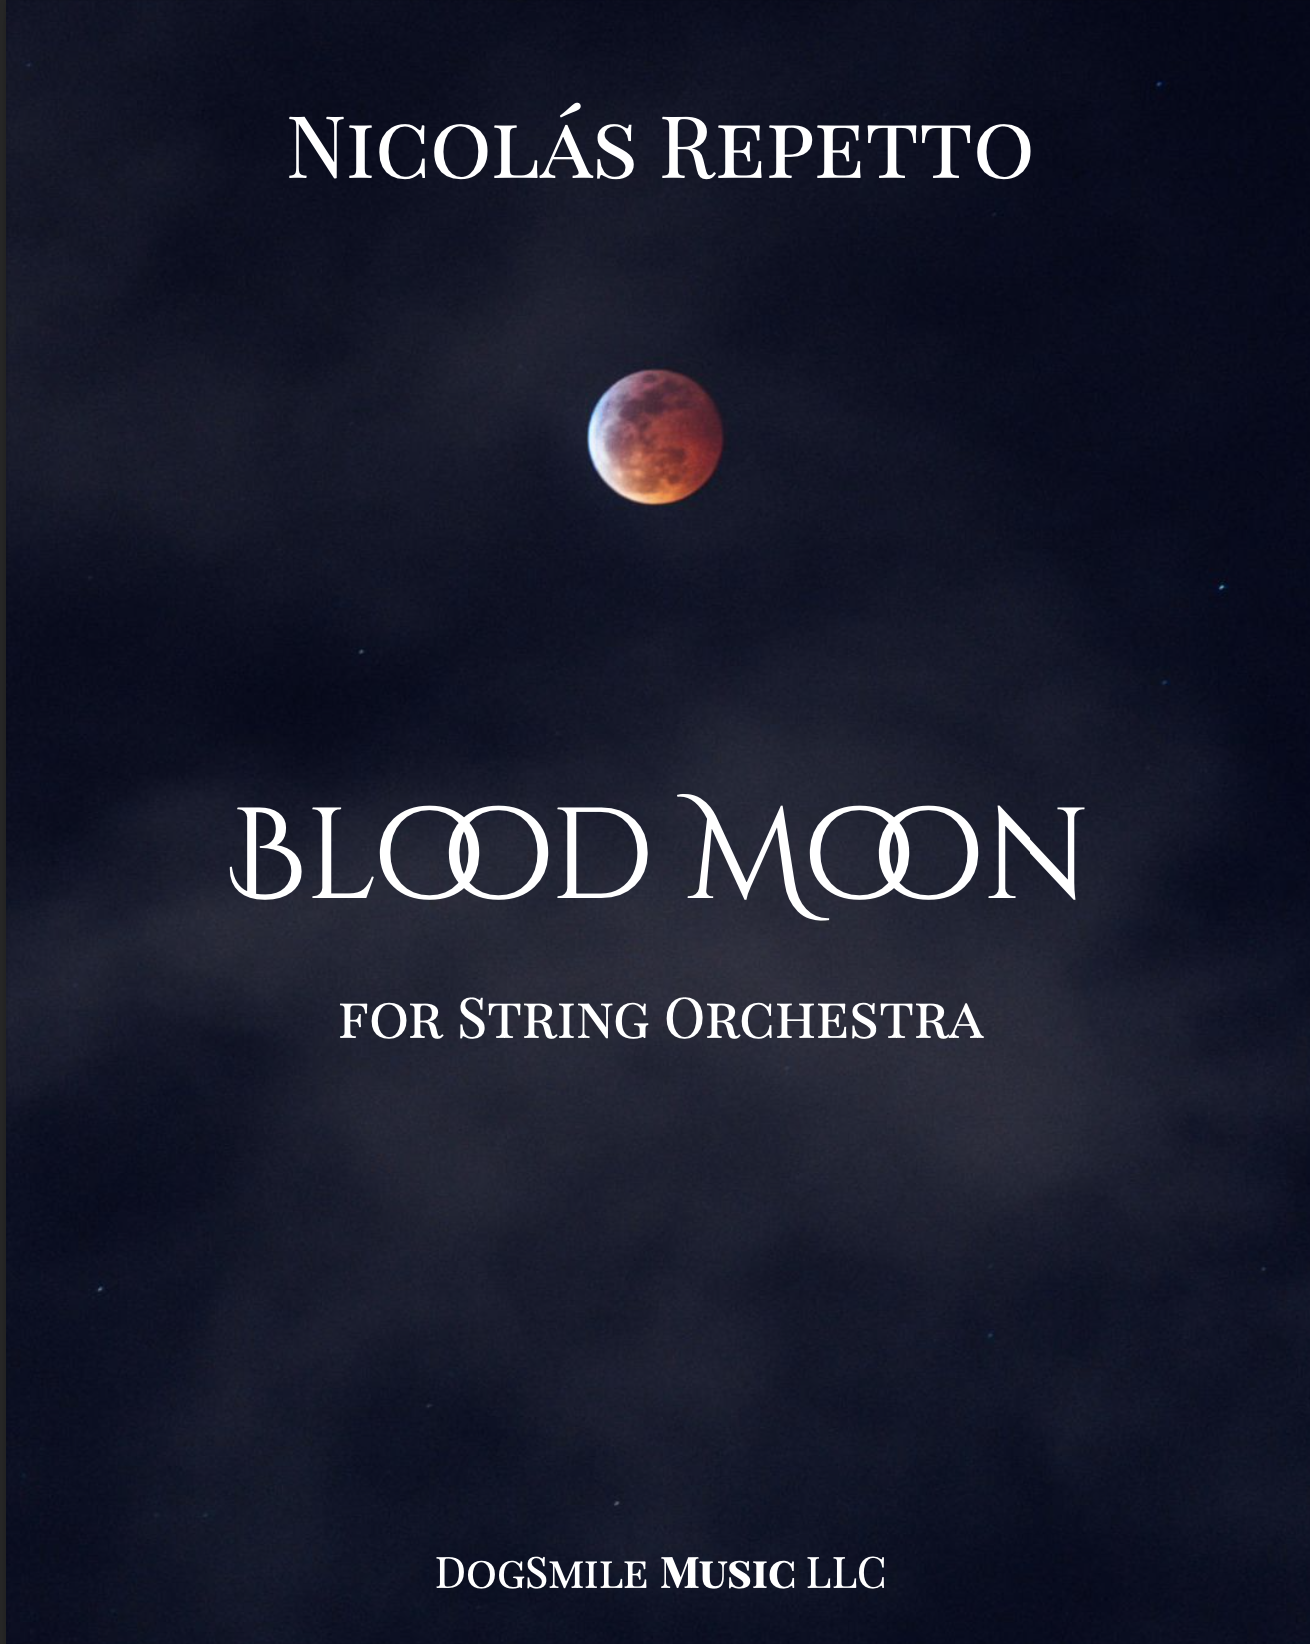 Blood Moon (Score Only) by Nicolas Repetto